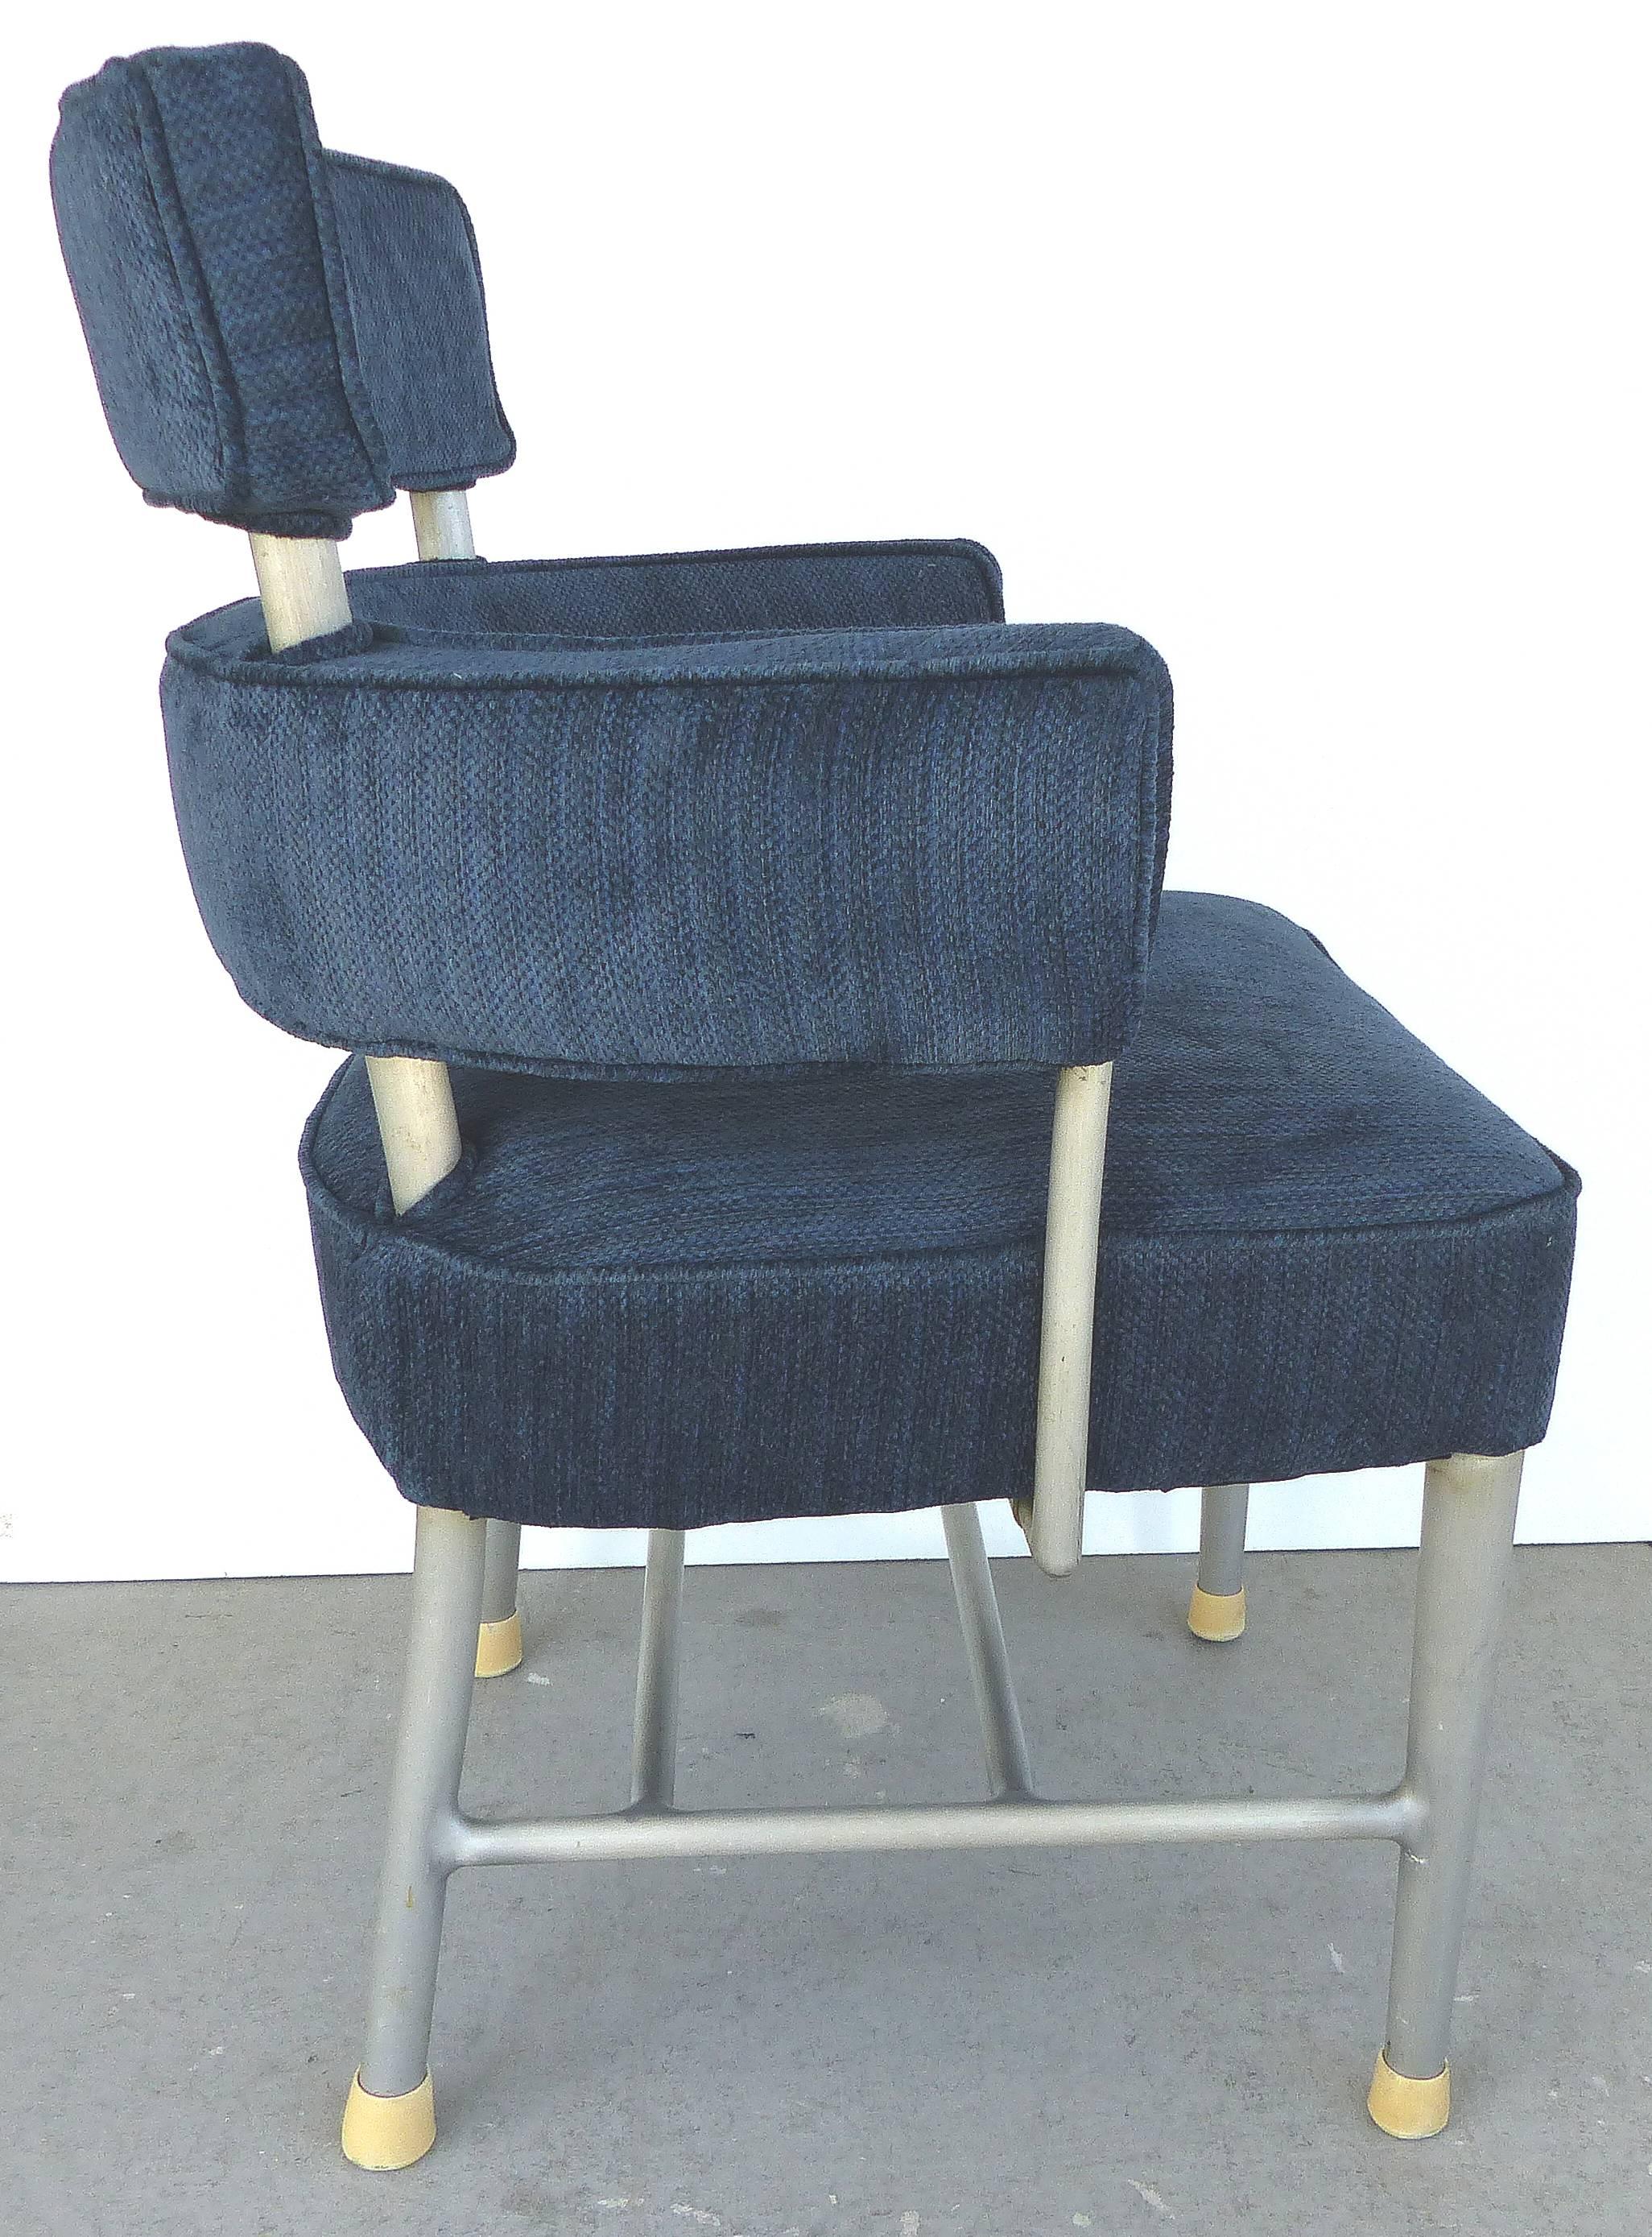 Mid-Century chair from American luxury ocean liner SS United States (1952-1969), designed by Dorothy 